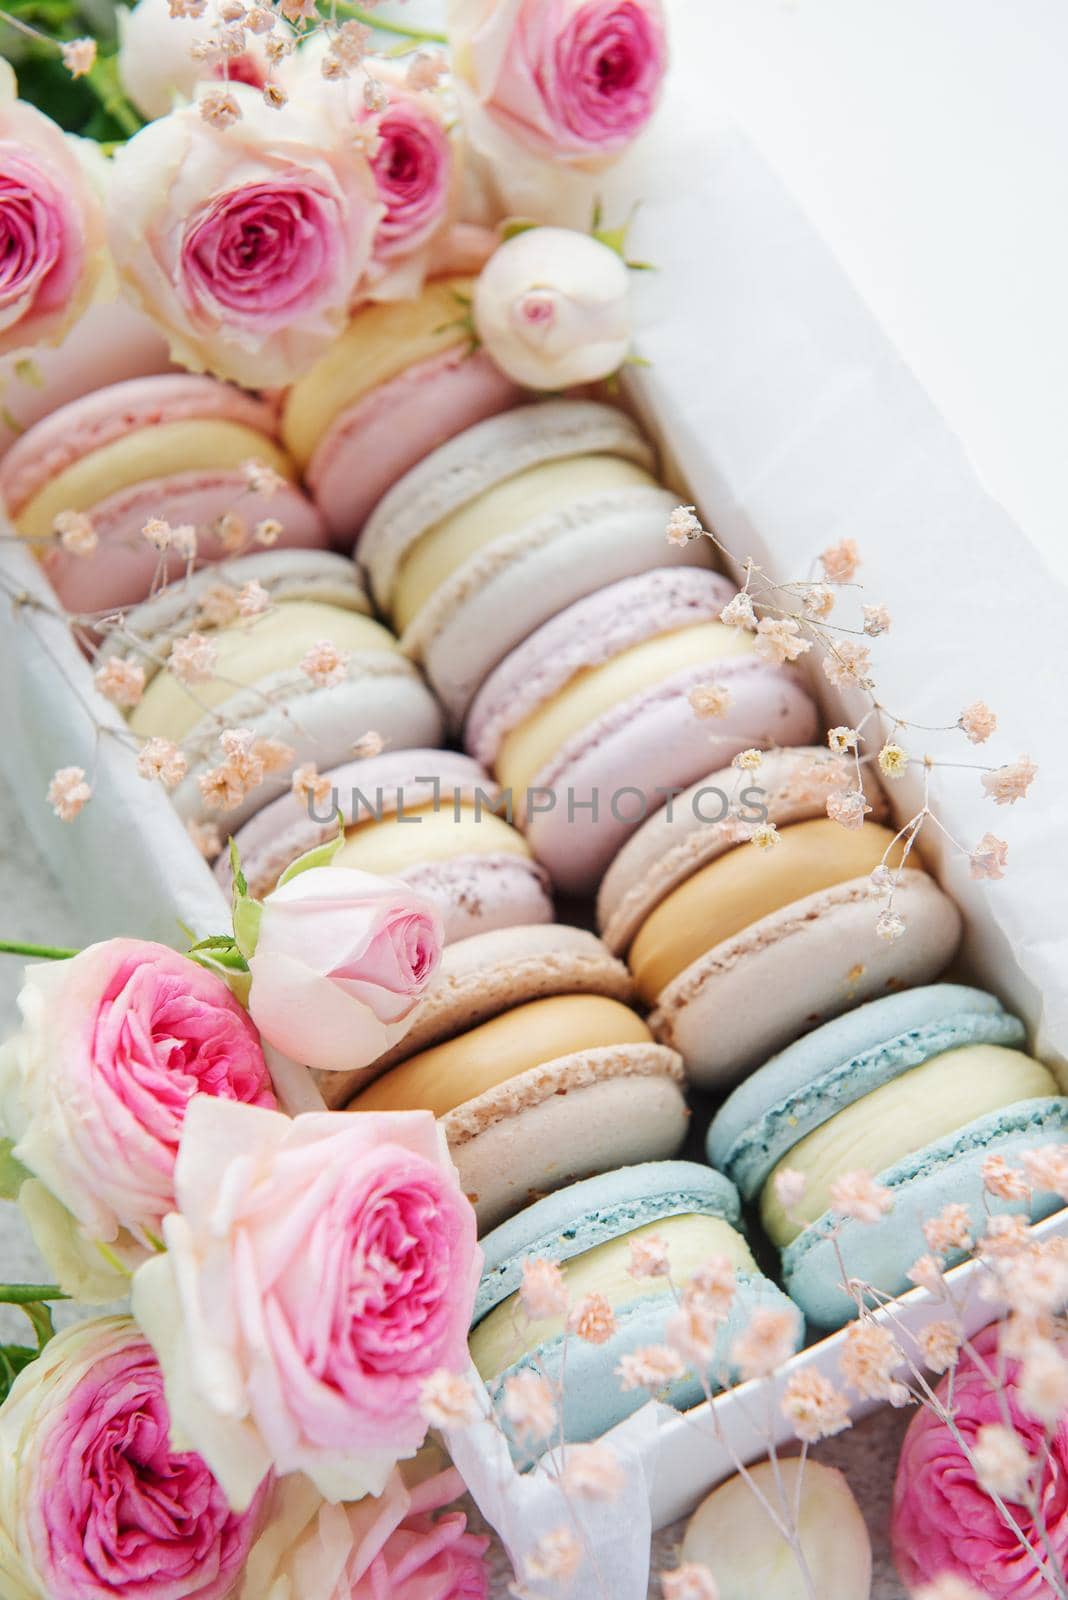 Colorful macaroons in a gift box and roses by Almaje